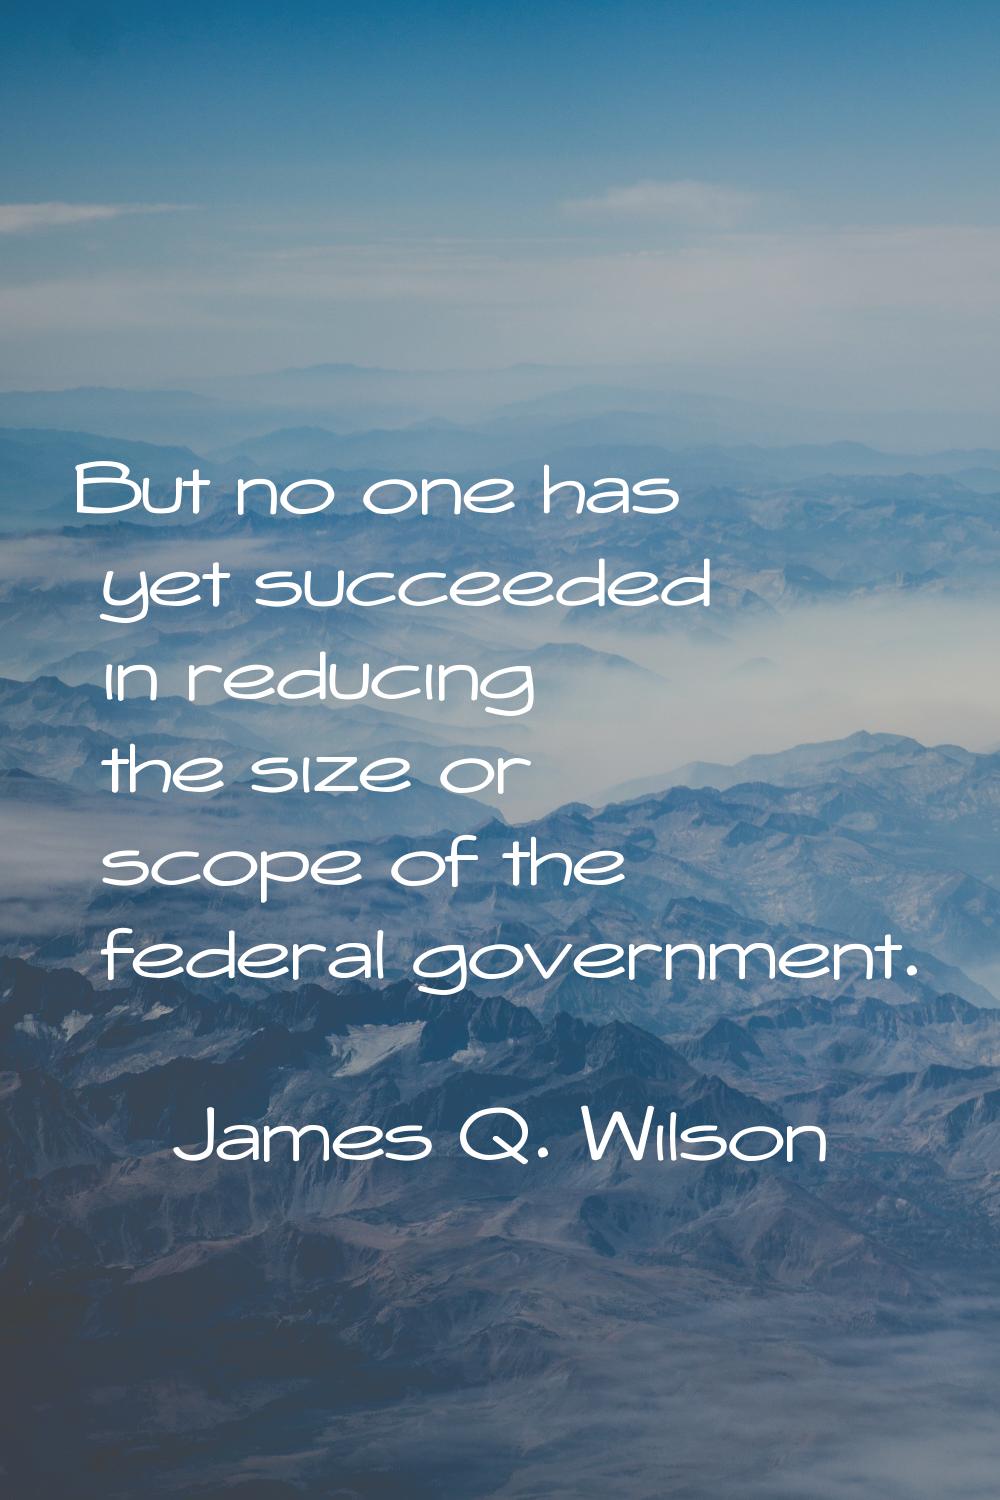 But no one has yet succeeded in reducing the size or scope of the federal government.